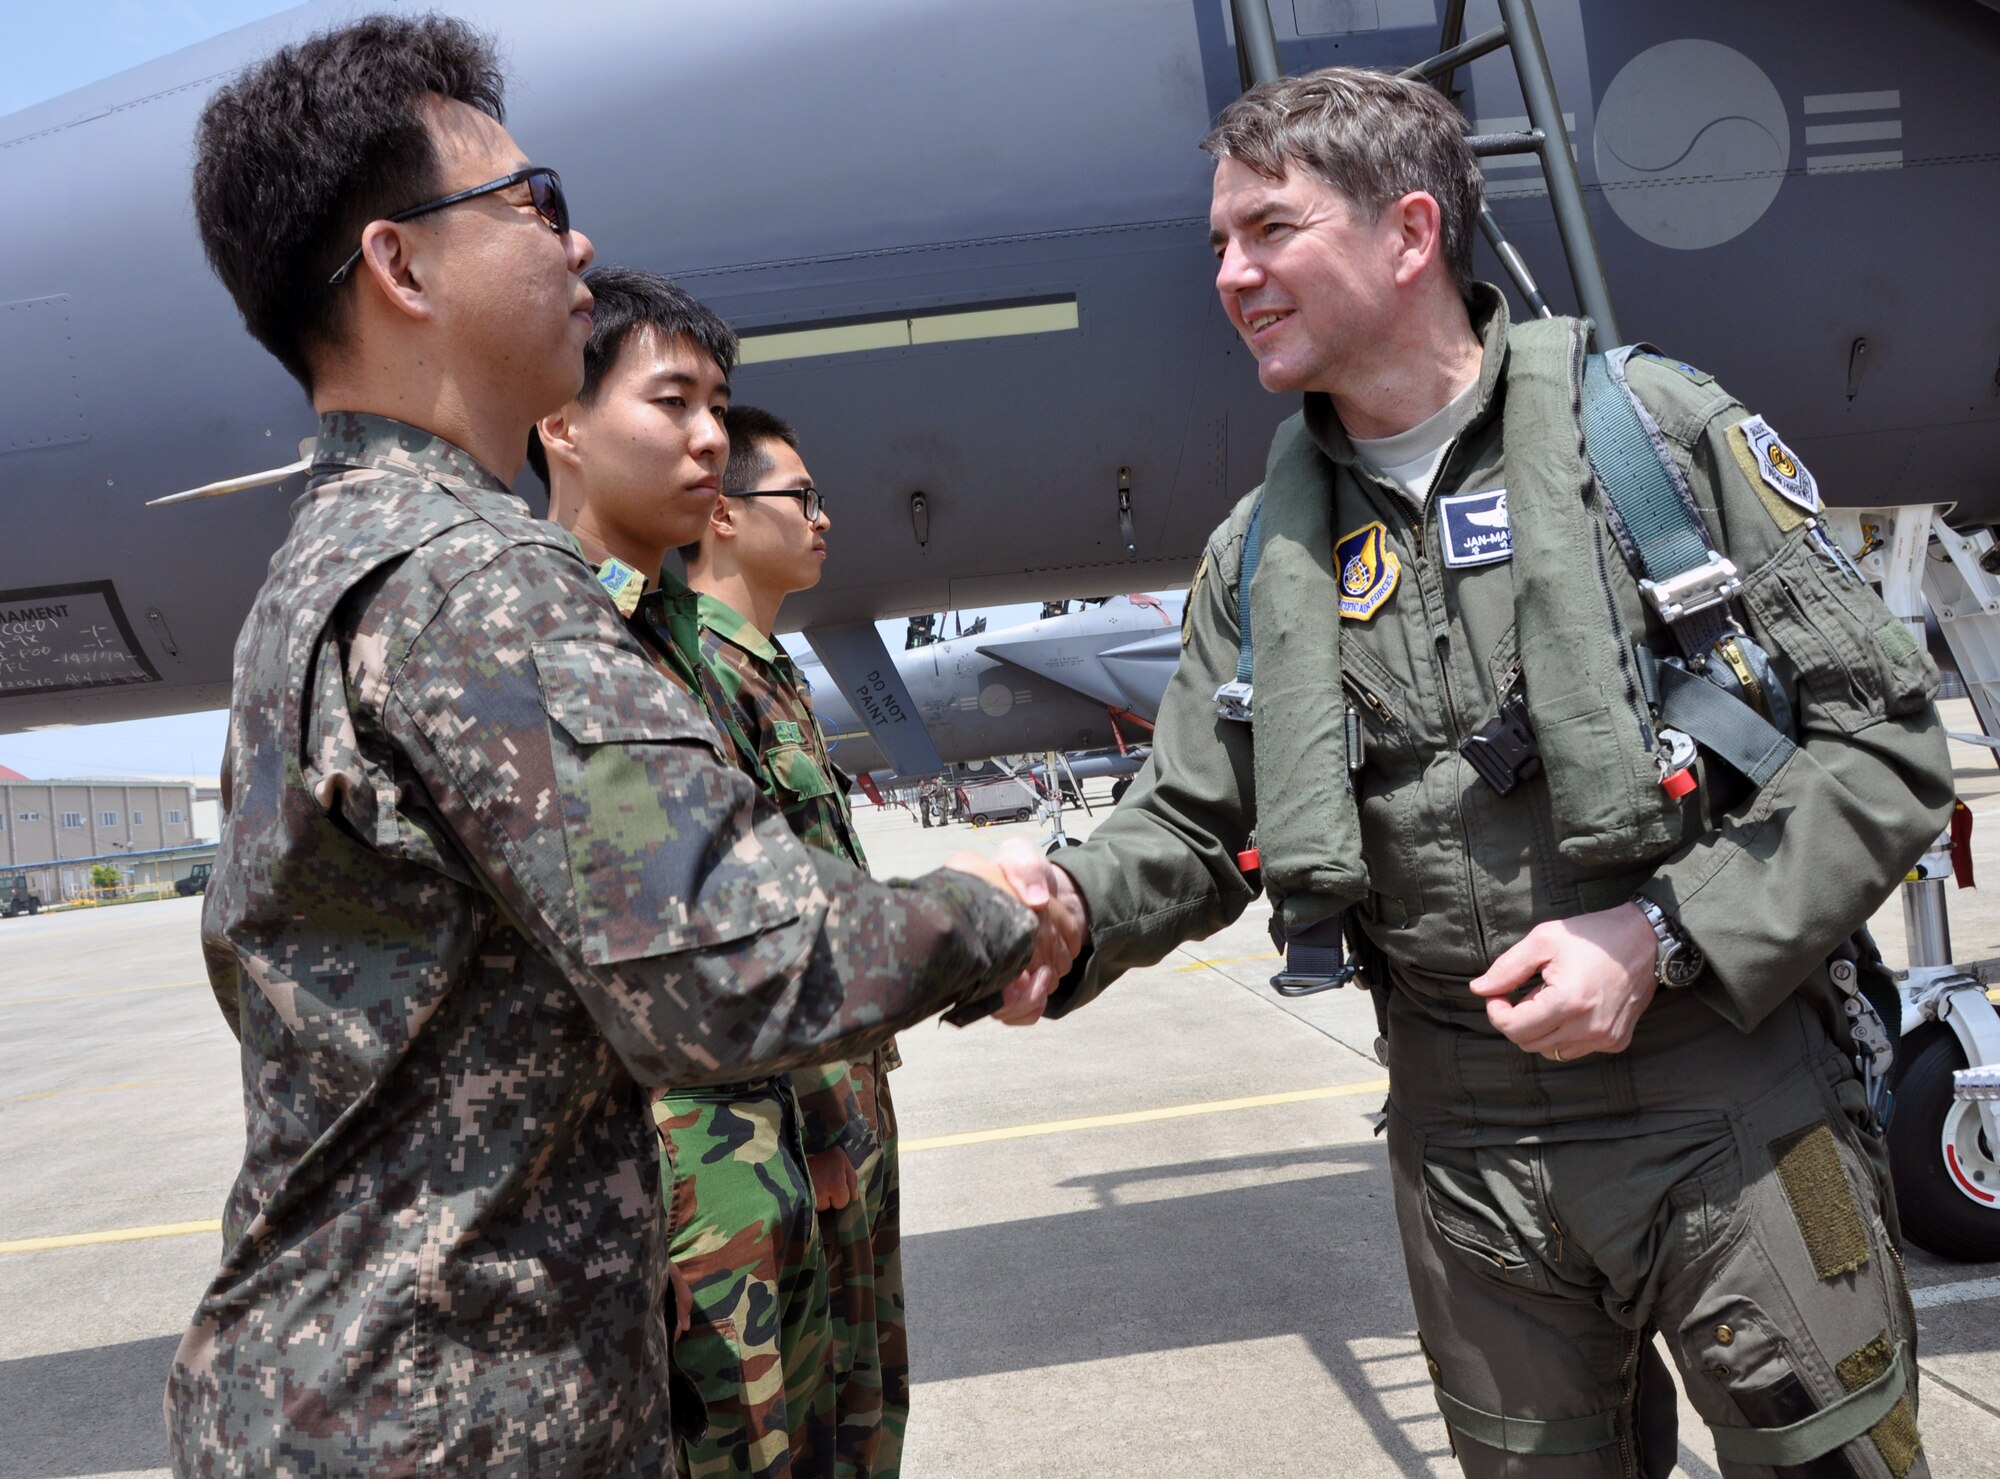 Lt. Gen. Jan-Marc Jouas, 7th Air Force commander, coins members of the Republic of Korea Air Force after his flight in an F-15K Slam Eagle at Gwangju Air Base, May 15, 2012. Before his flight, ROK and U.S. crews provided a flight-support gear fitting, flight briefing, and preflight checks to the general. Jouas’ 2-hour flight was during combined exercise Max Thunder. (U.S Air Force photo/Airman 1st Class Michael Battles)